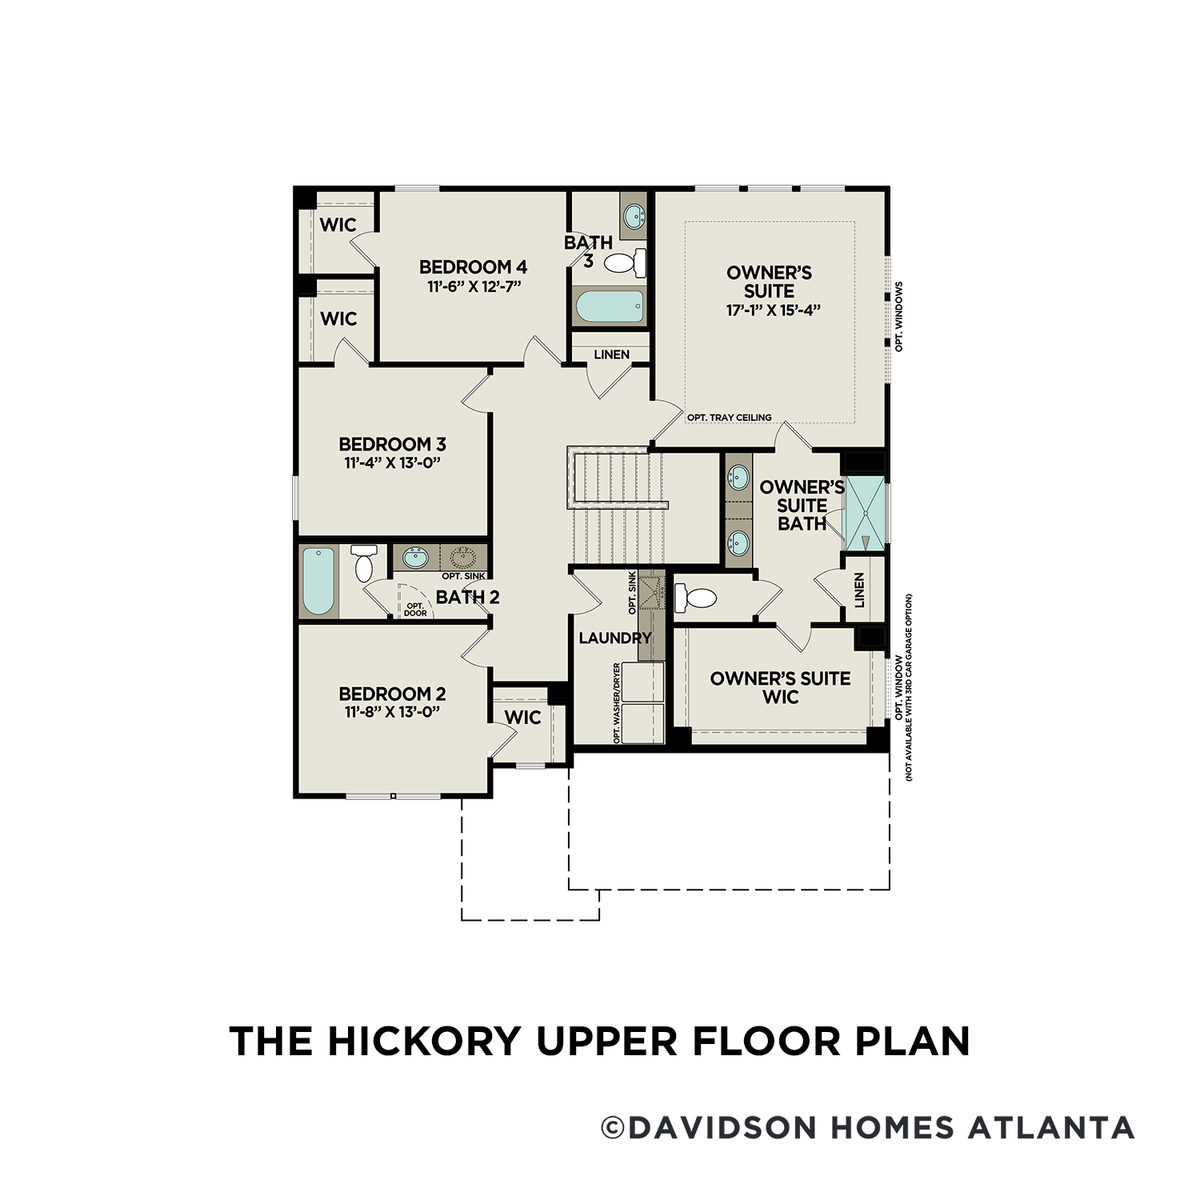 2 - The Hickory B floor plan layout for 346 Riverwood Drive in Davidson Homes' Riverwood community.